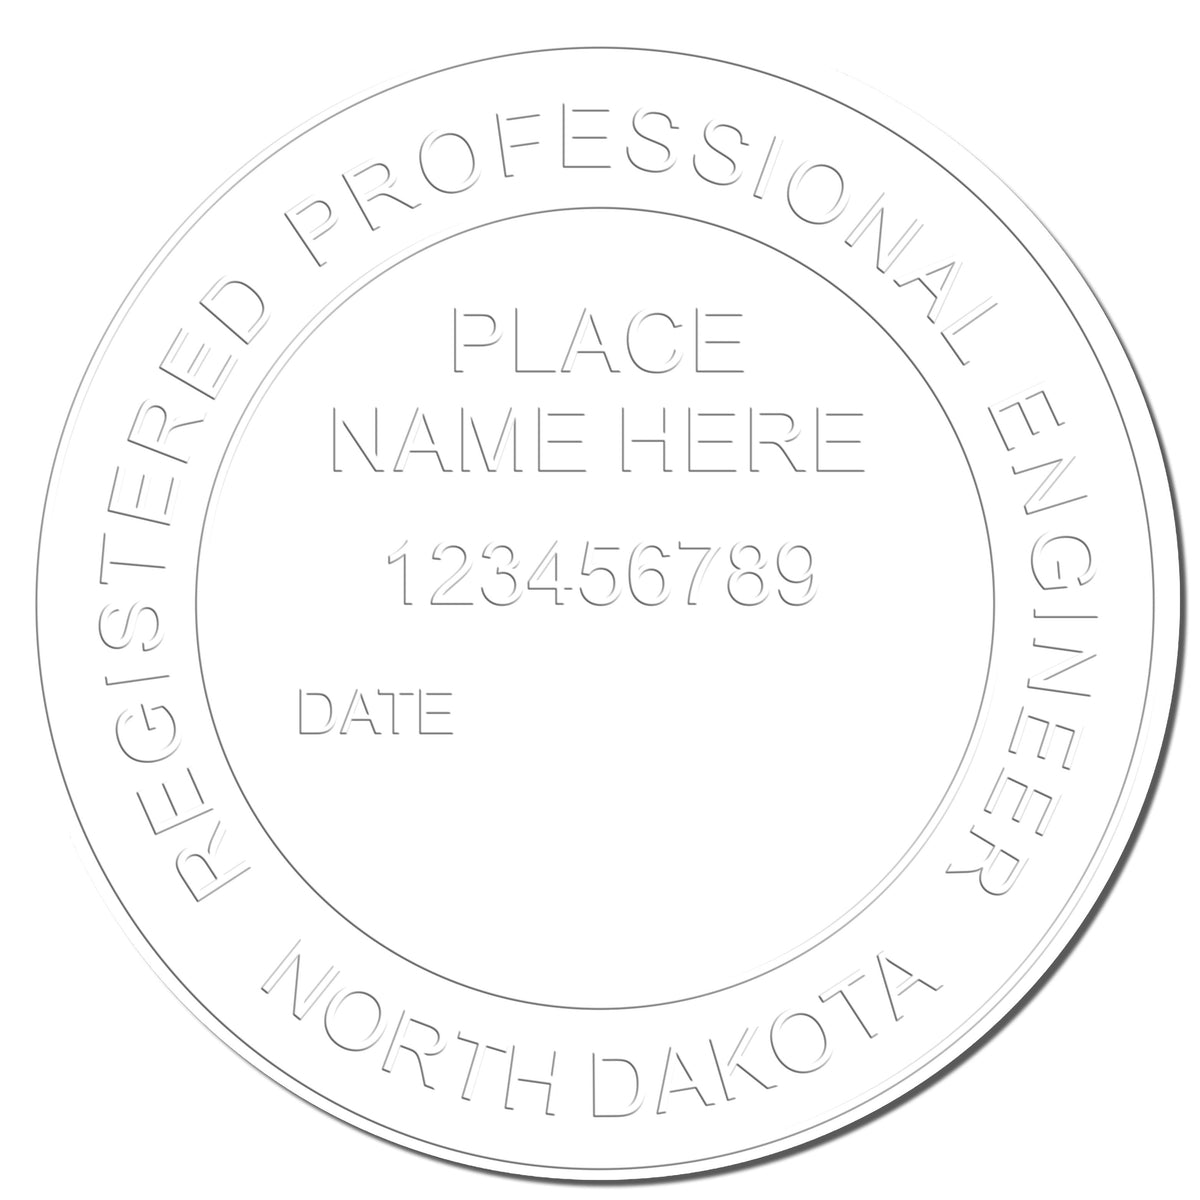 This paper is stamped with a sample imprint of the Heavy Duty Cast Iron North Dakota Engineer Seal Embosser, signifying its quality and reliability.